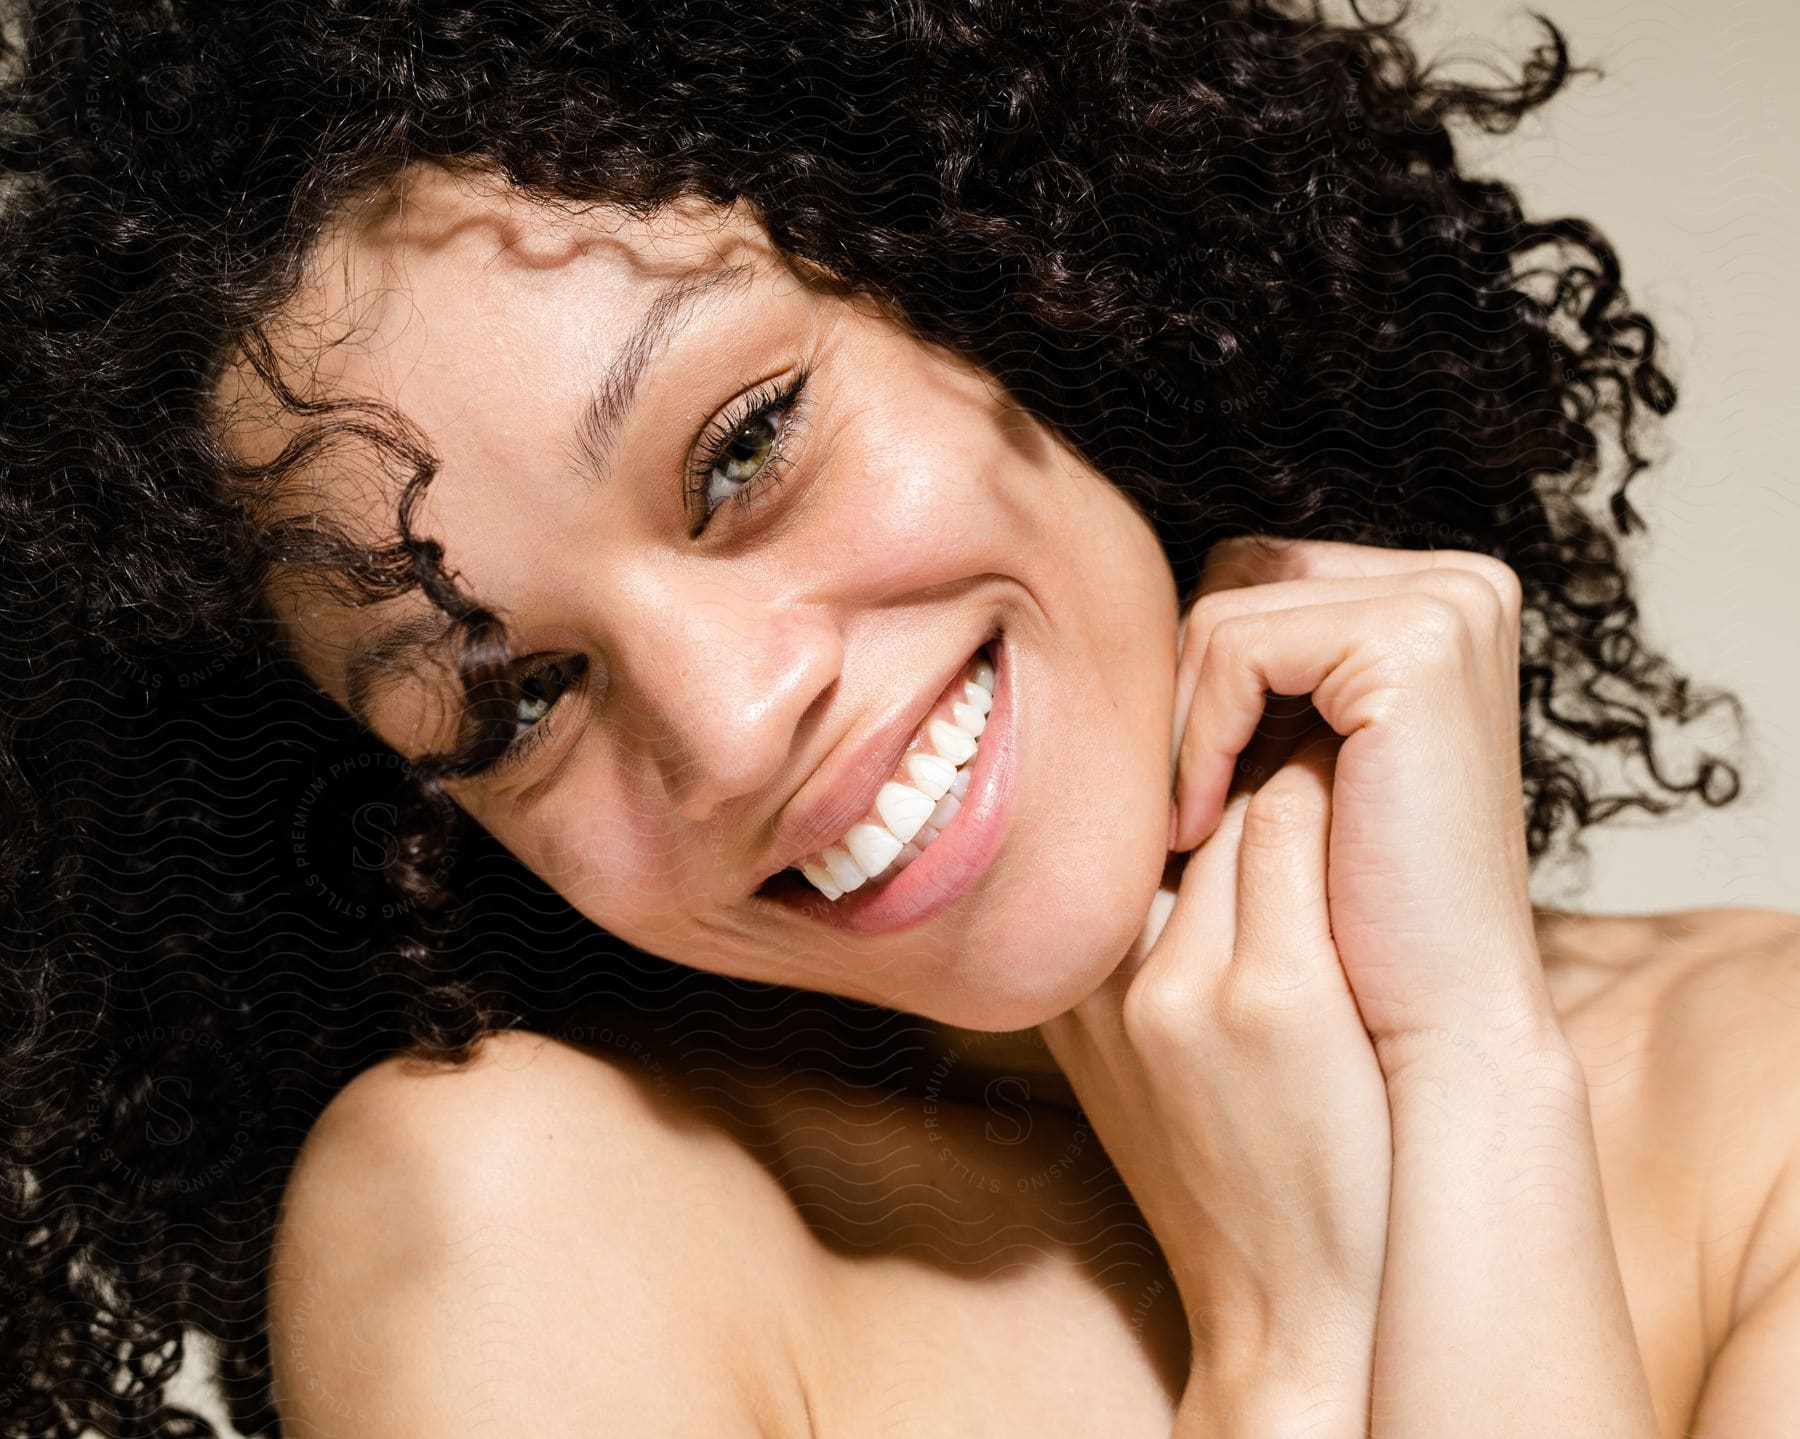 A smiling woman, with curly hair and light eyes.